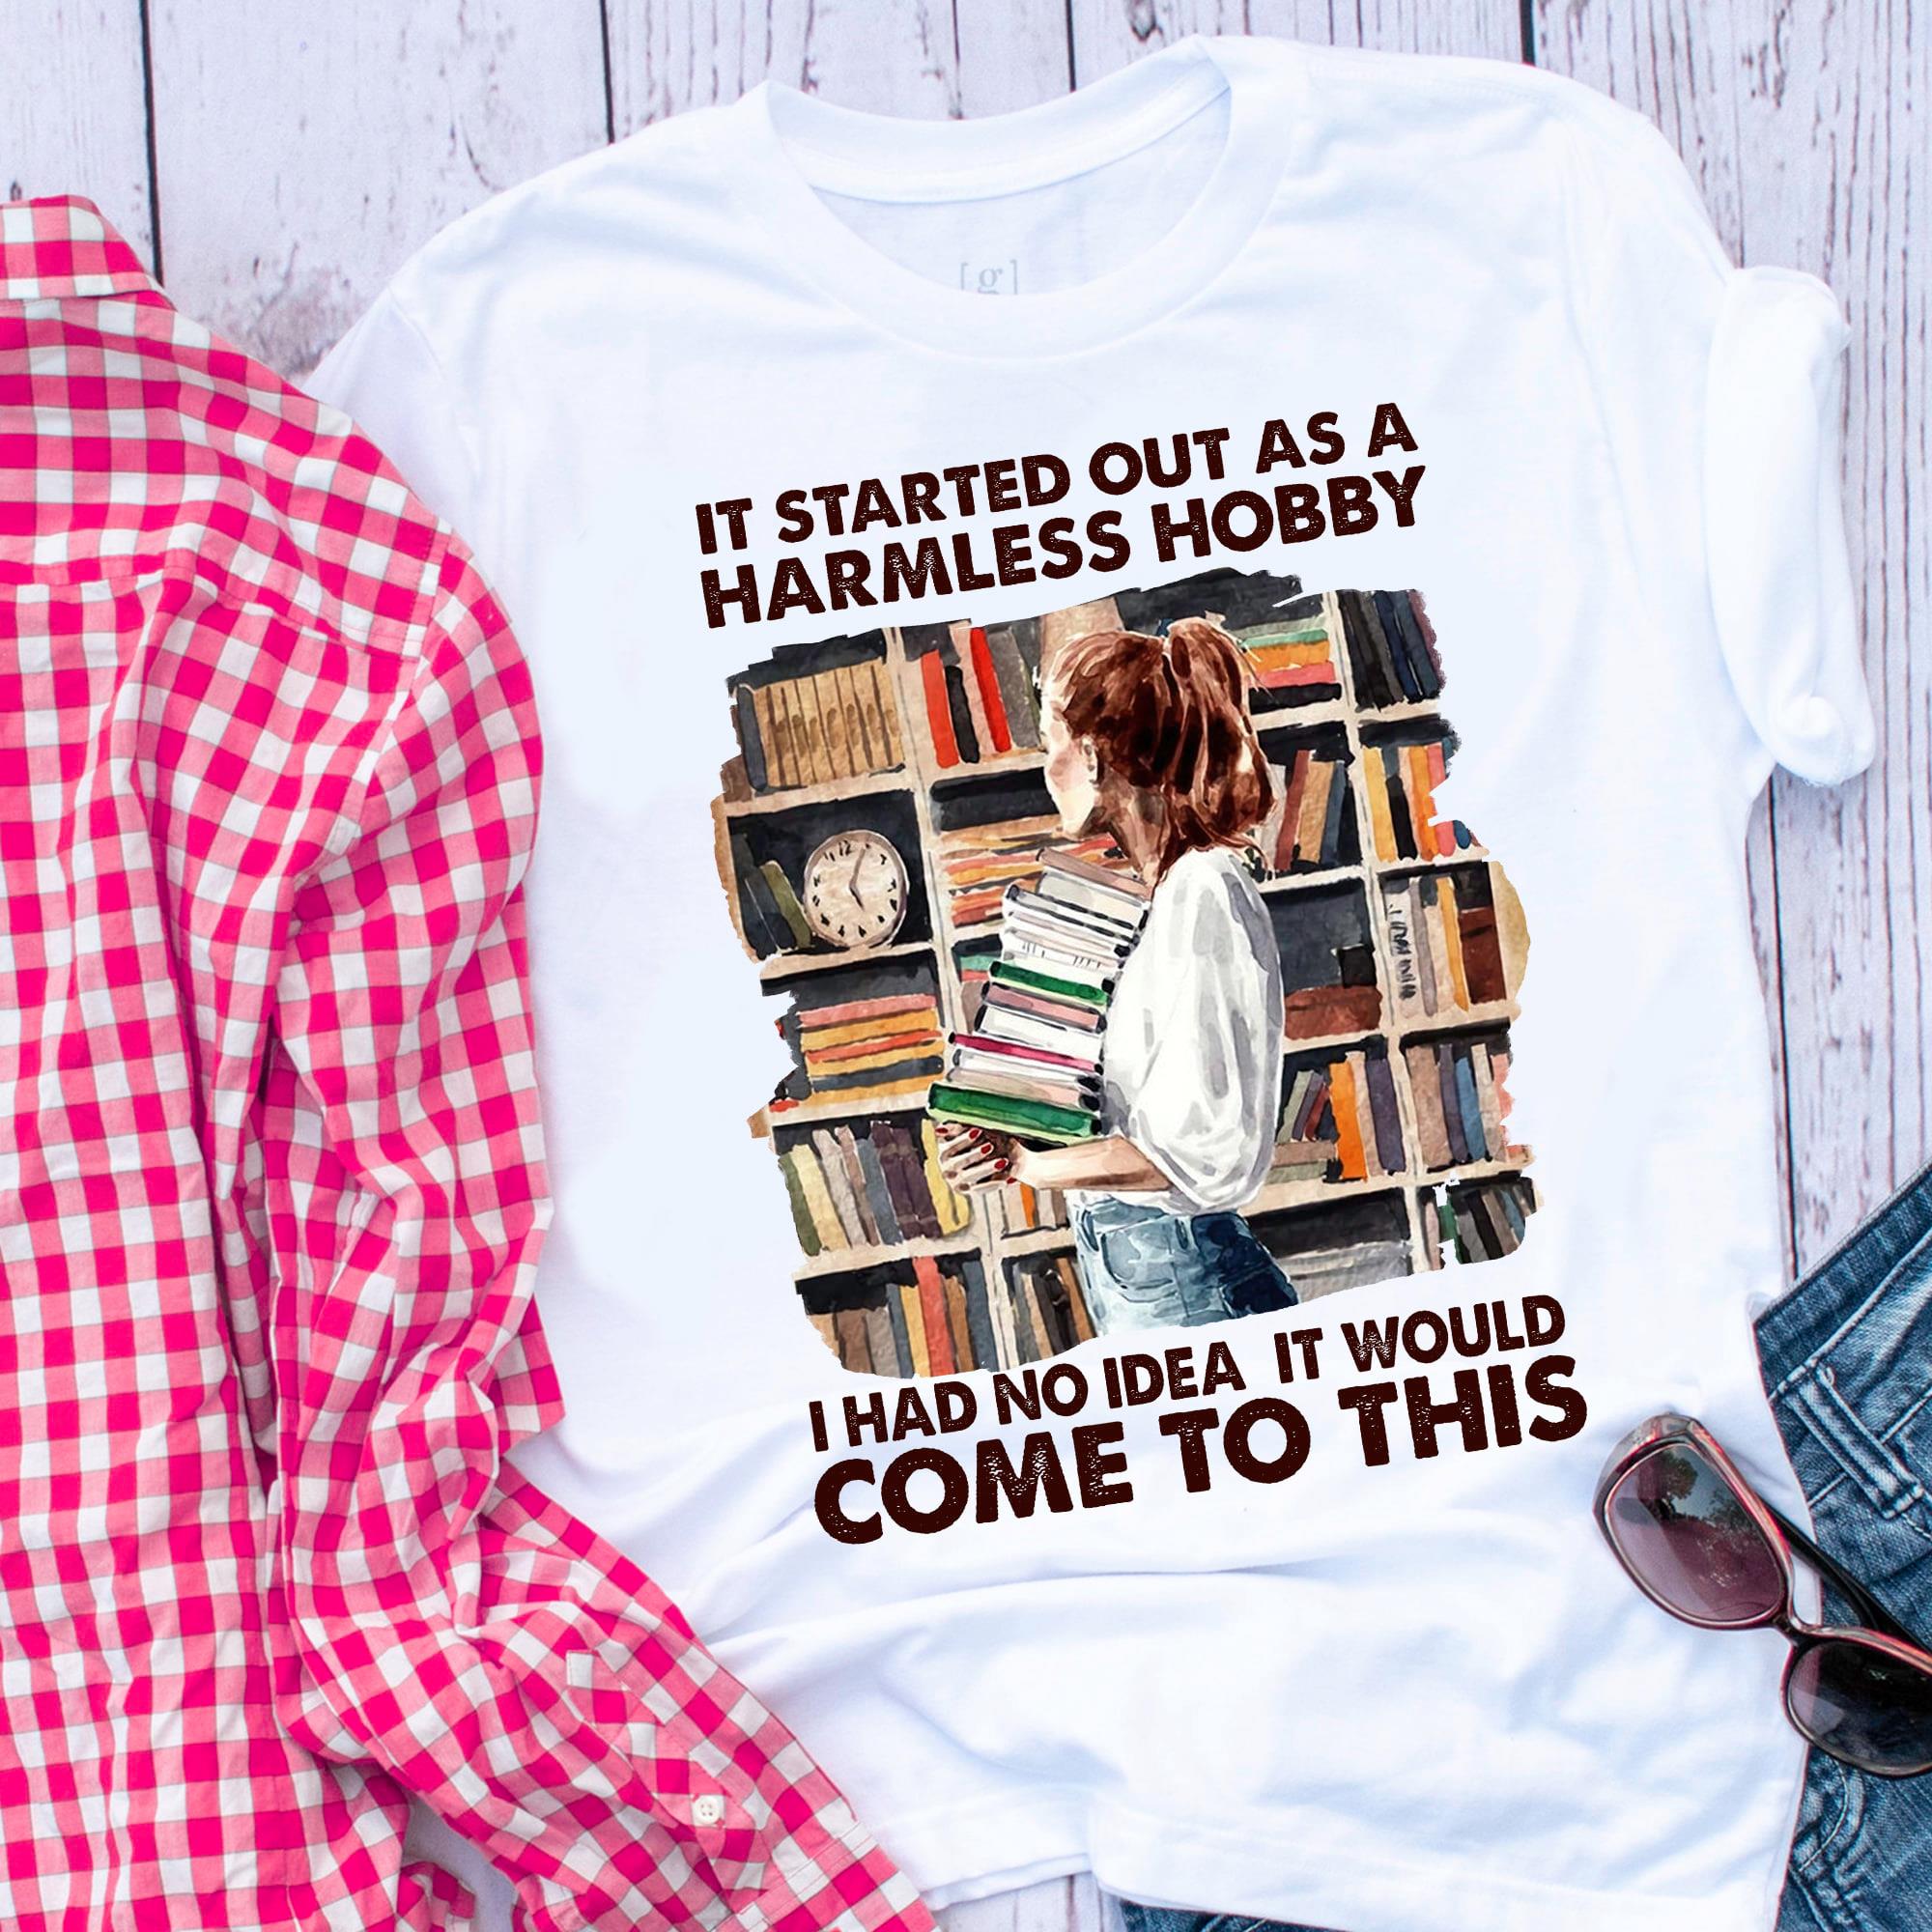 It started out as a harmless hobby I had no idea it would come to this book t shirt, Book Lover Shirt, Reading Gifts Cotton Shirt For Women